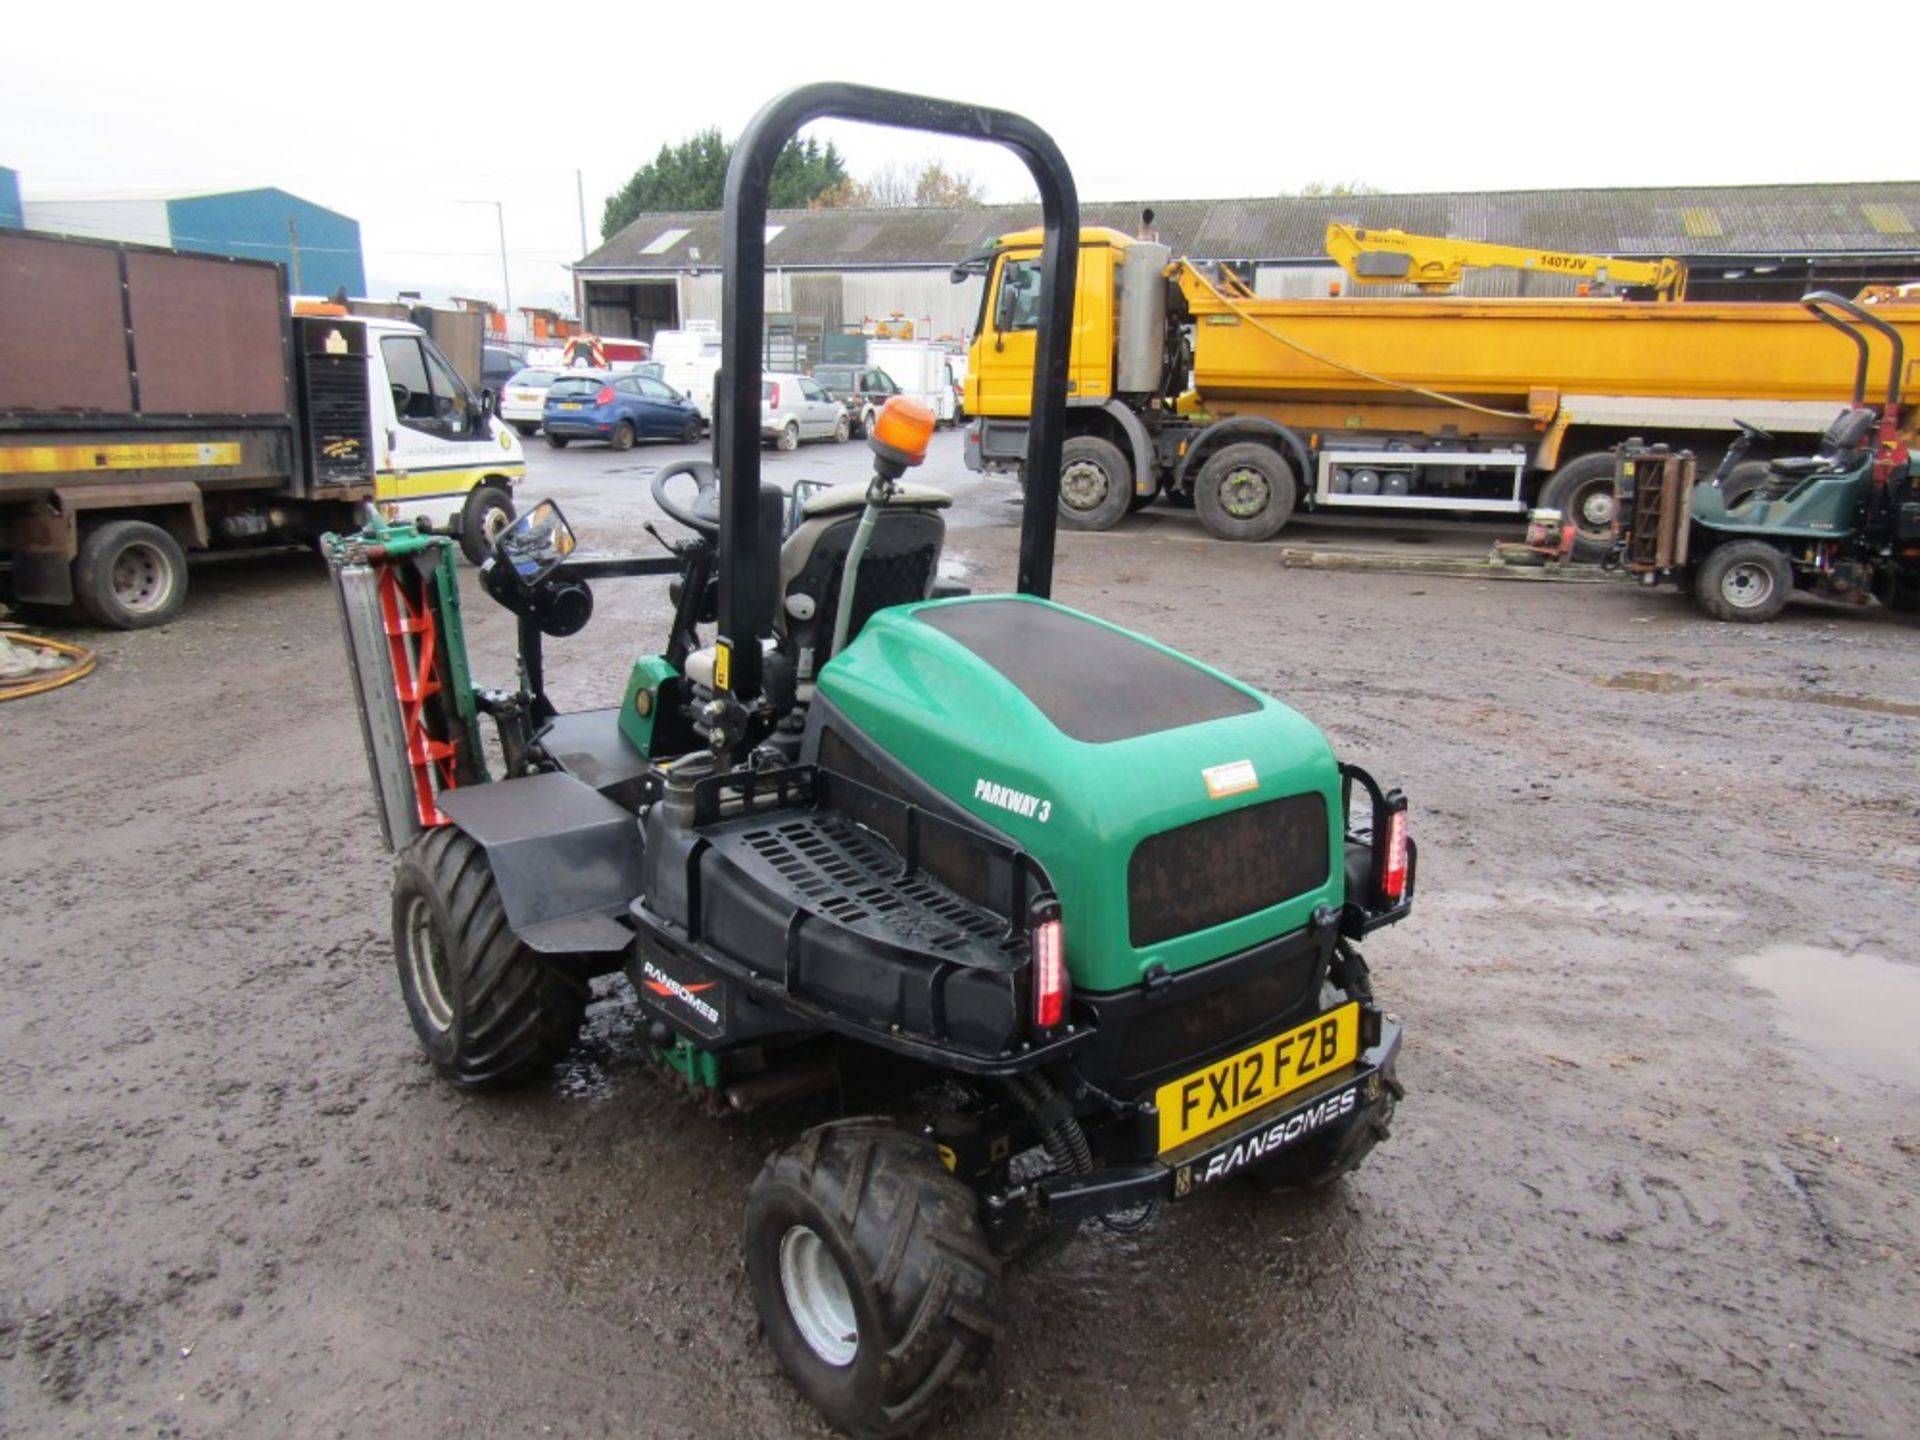 12 reg RANSOMES PARKWAY 3 RIDE ON MOWER (DIRECT COUNCIL) 1ST REG 04/12, V5 HERE, 1 FORMER - Image 3 of 5